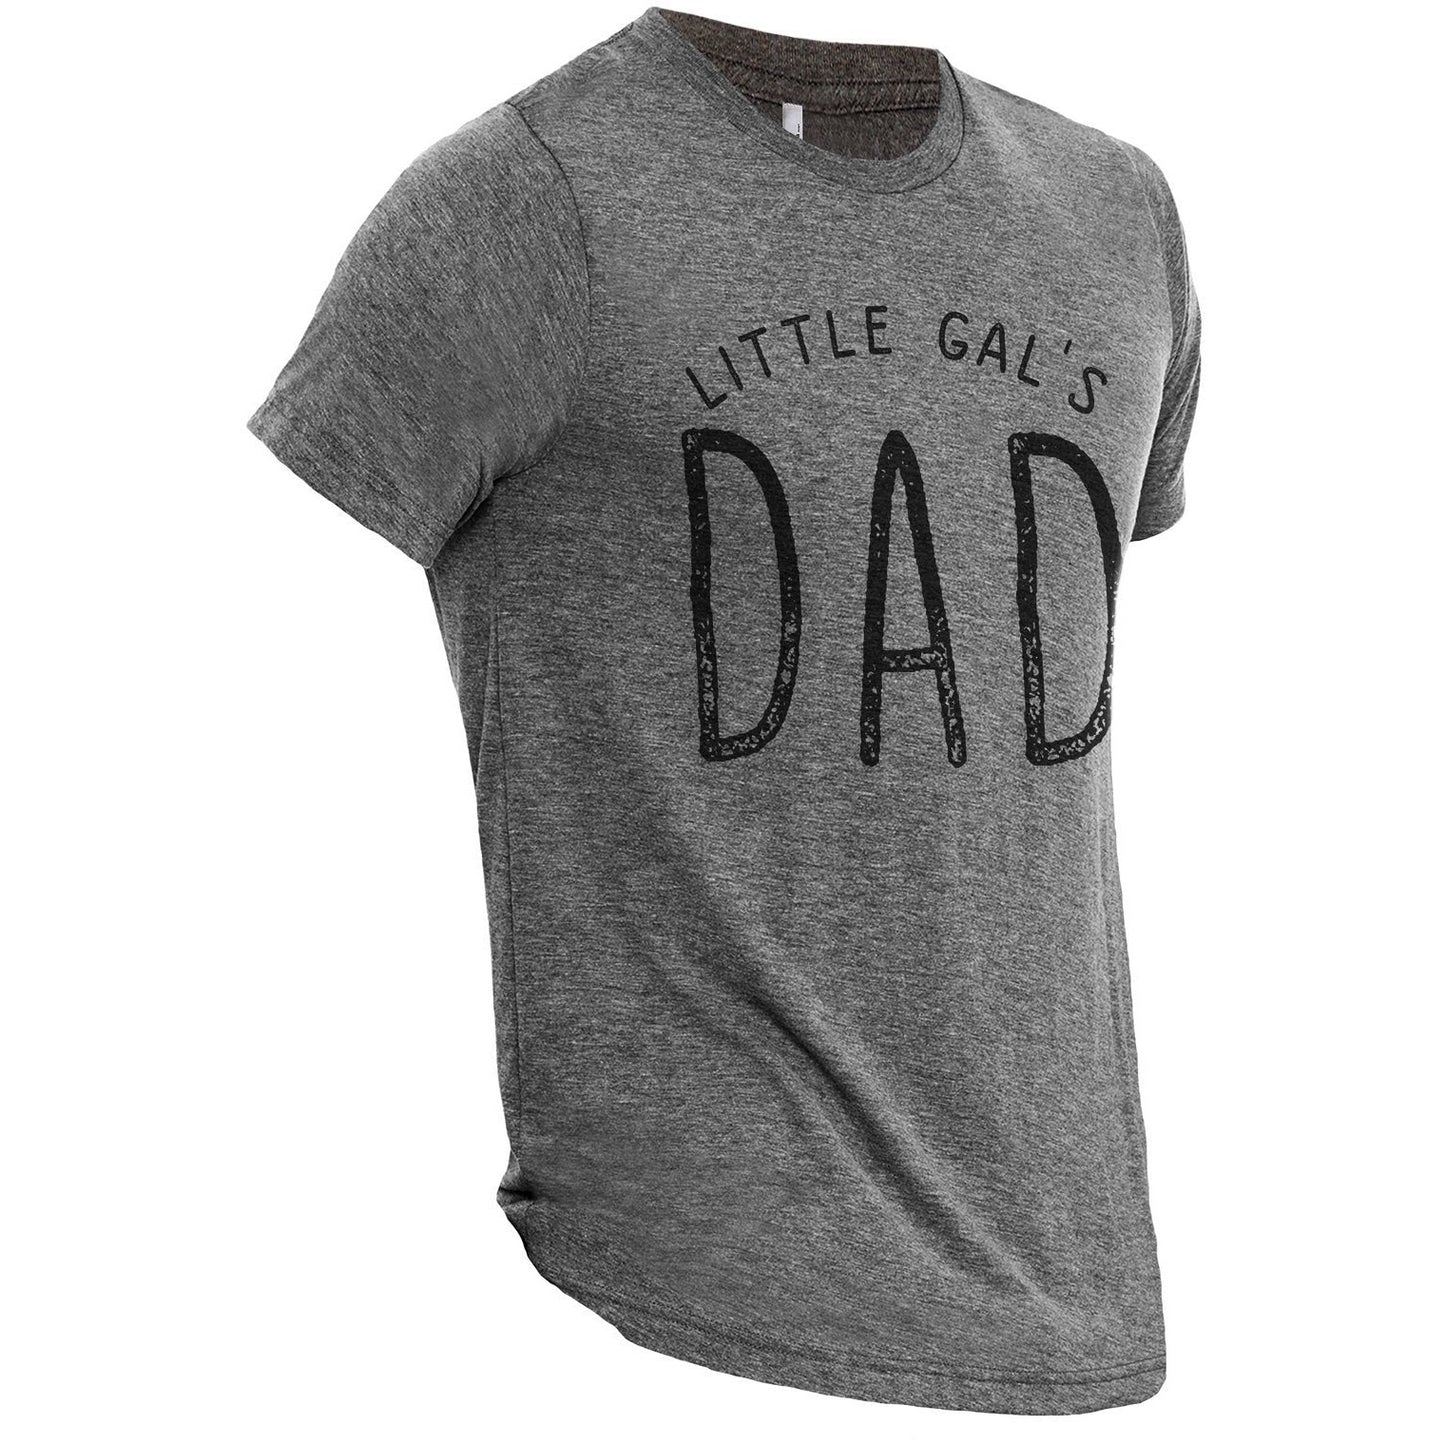 Lil Gal's Dad Heather Grey Printed Graphic Men's Crew T-Shirt Tee Side View